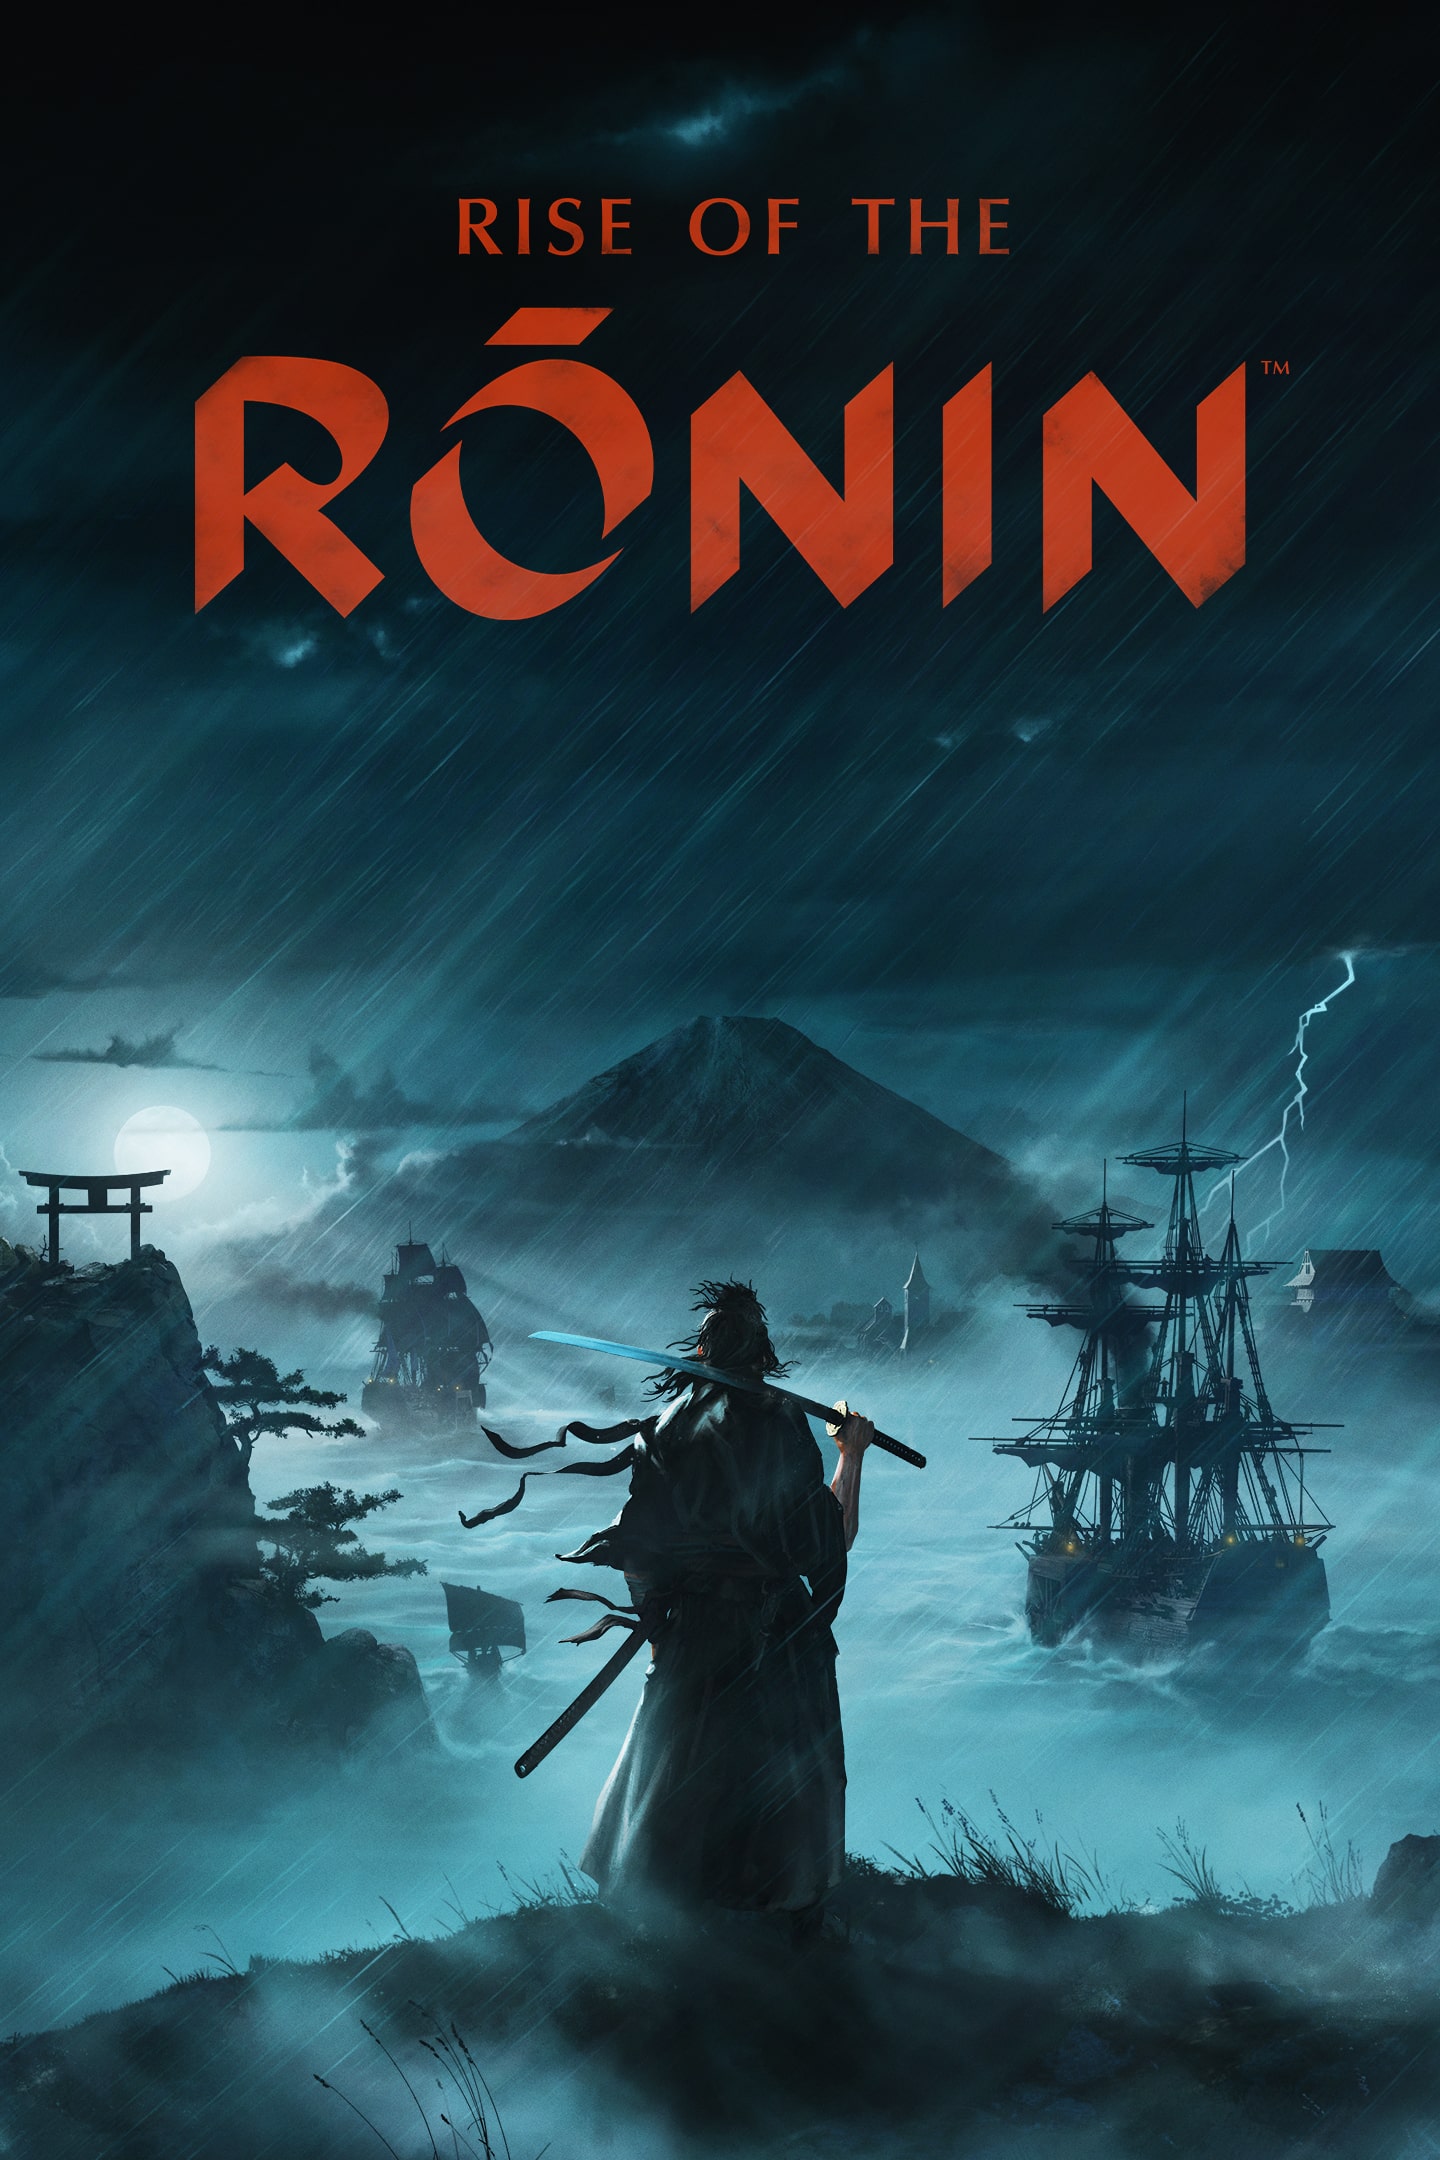 Rise of the Ronin™ Z version